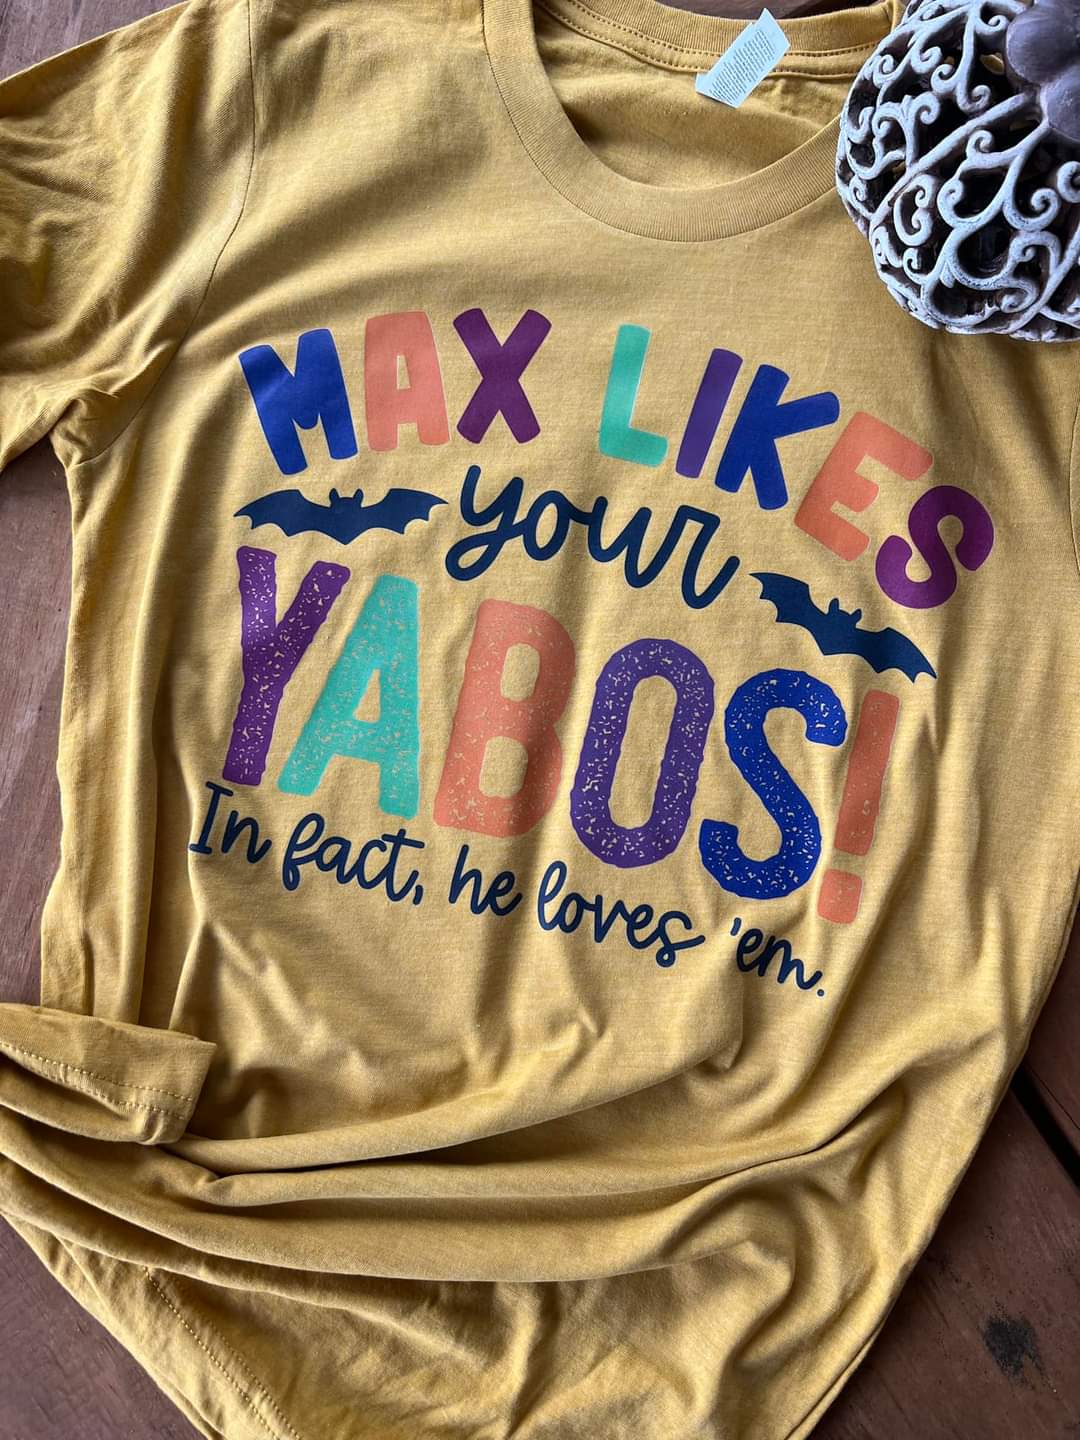 Max likes your yabos!